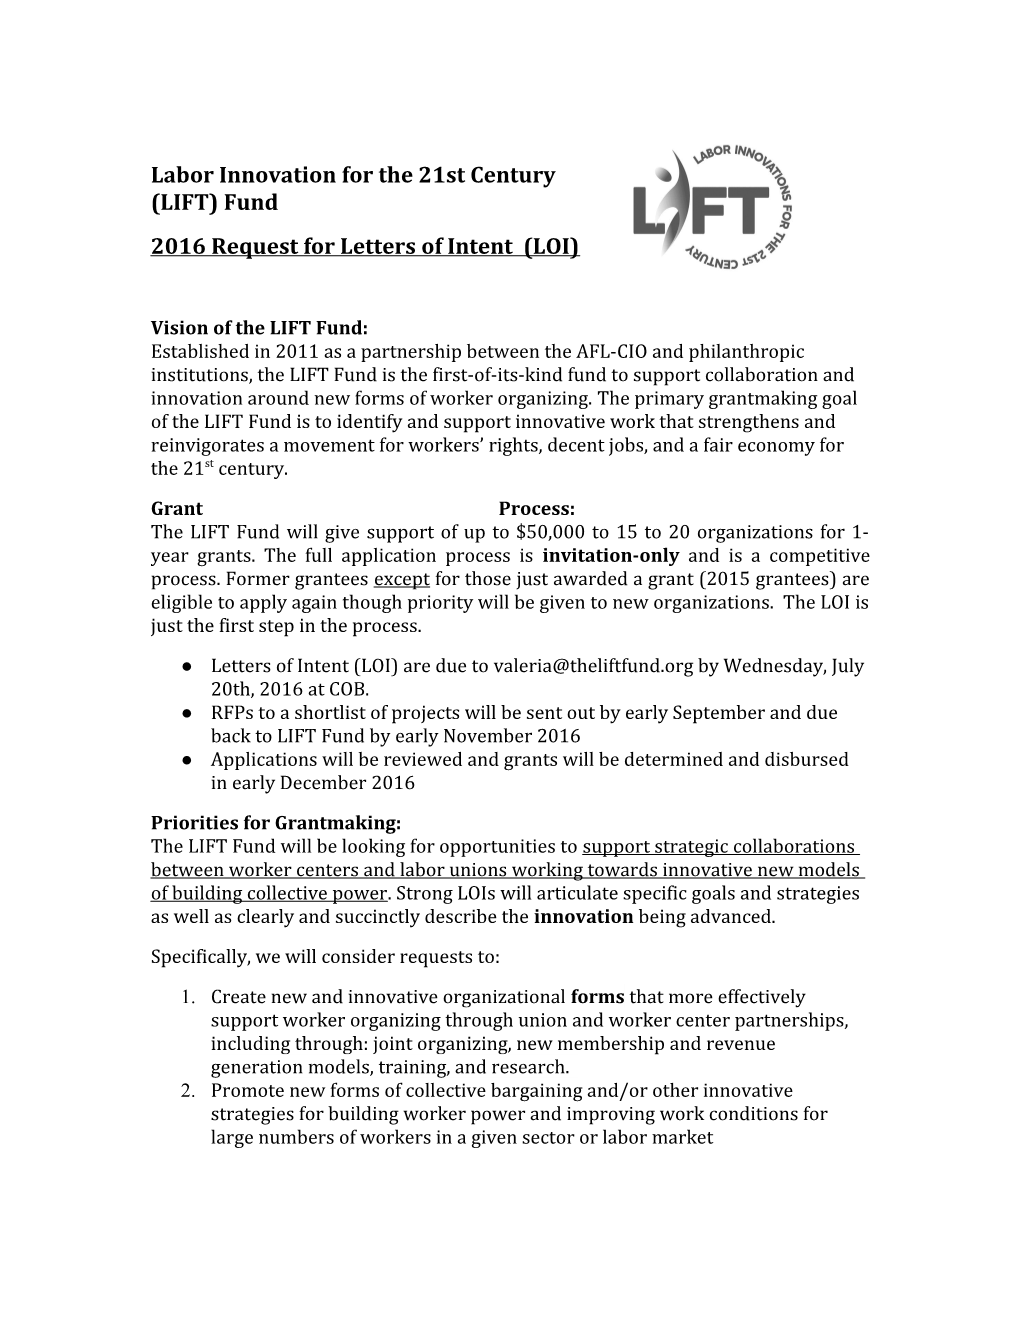 Labor Innovation for the 21St Century (LIFT) Fund